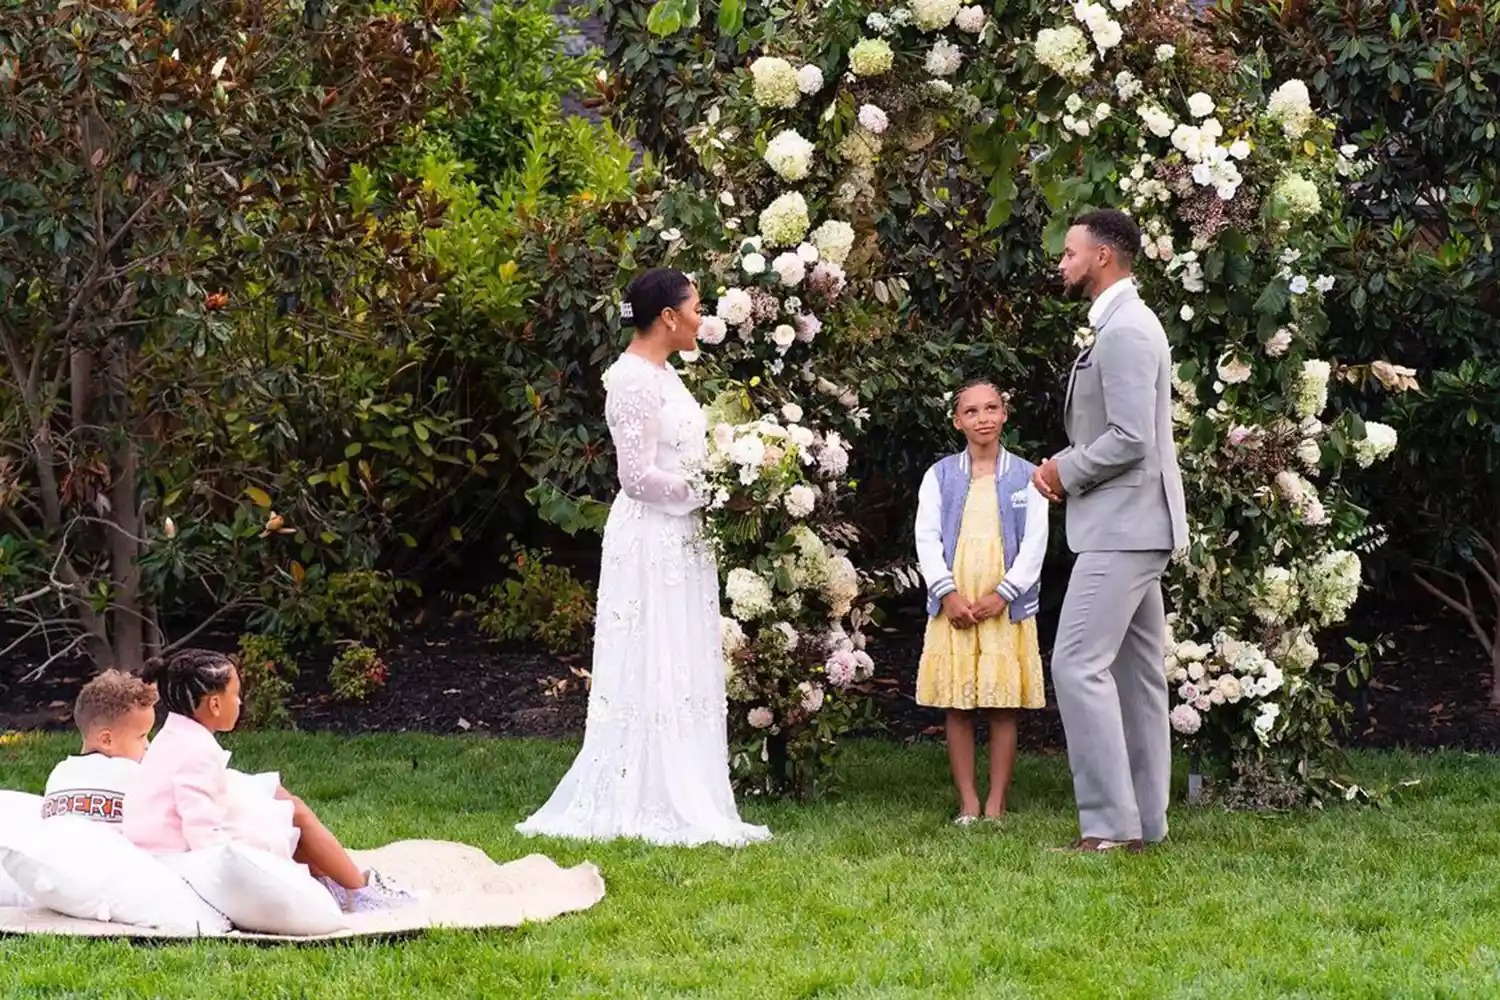 likhoa stephen curry surprised everyone when he organized a memorable th wedding anniversary for his wife ayesha curry 6548fc6c1a553 Stephen Curry Surprised Everyone When He Organized A Memorable 10th Wedding Anniversary For His Wife Ayesha Curry.